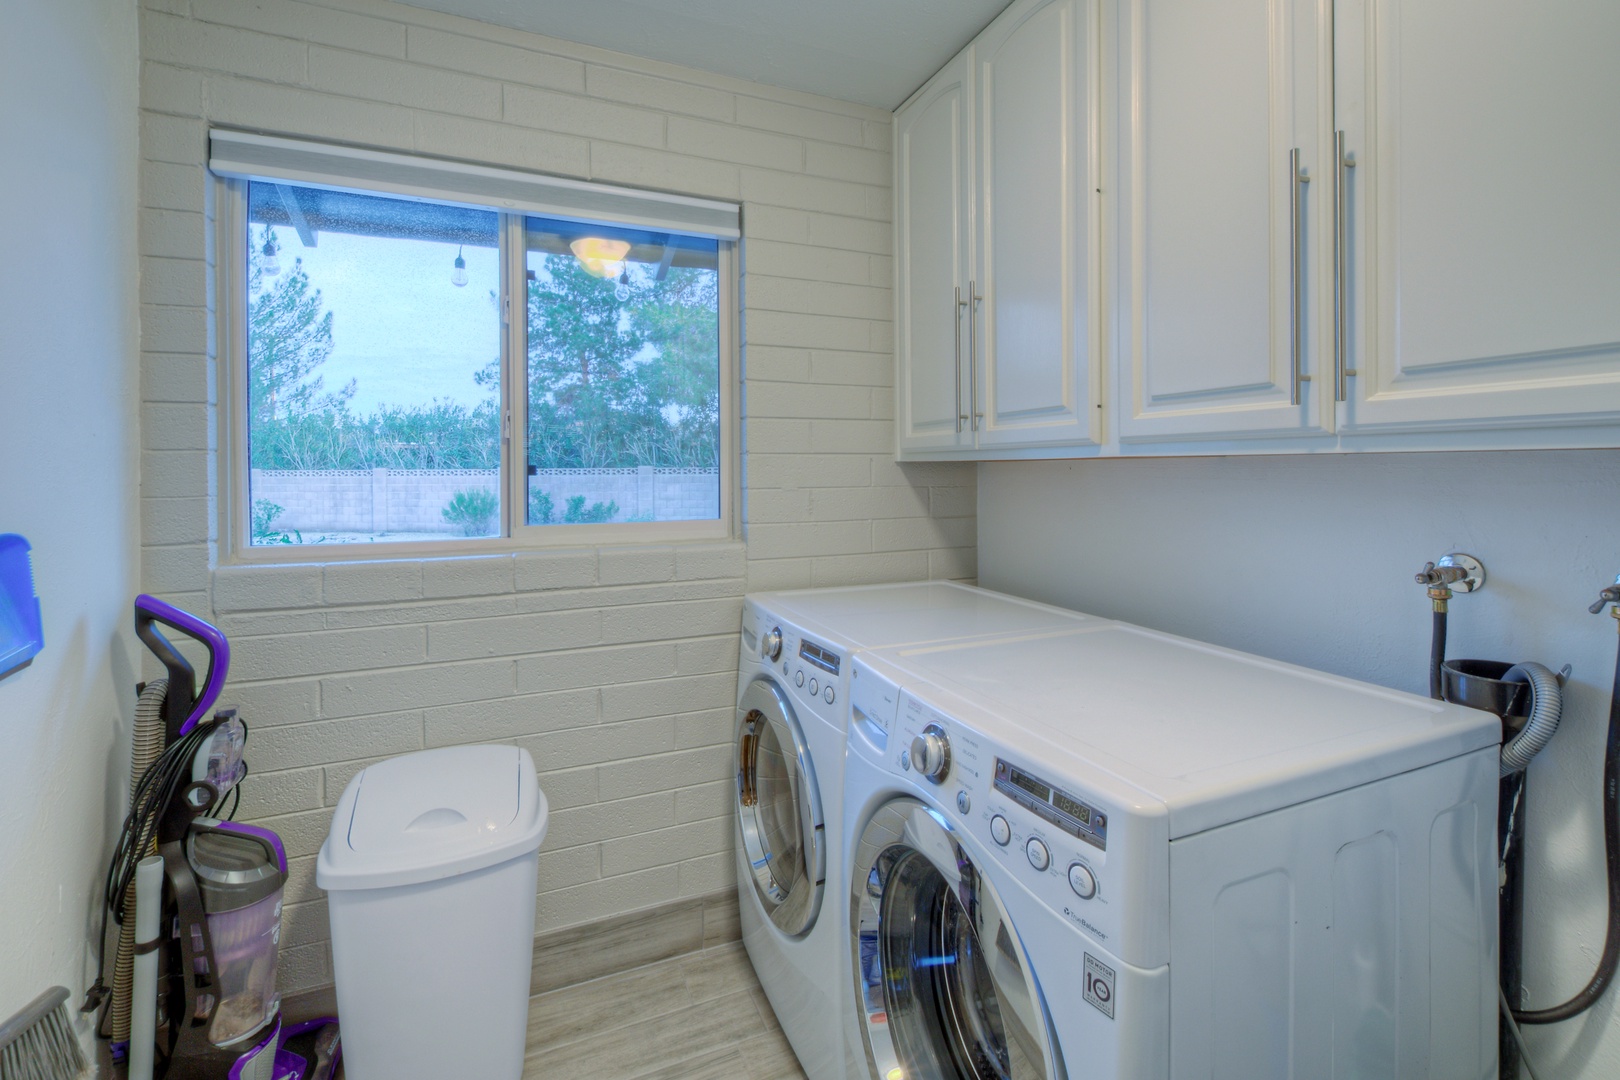 Washer and Dryer are available. Complimentary detergent